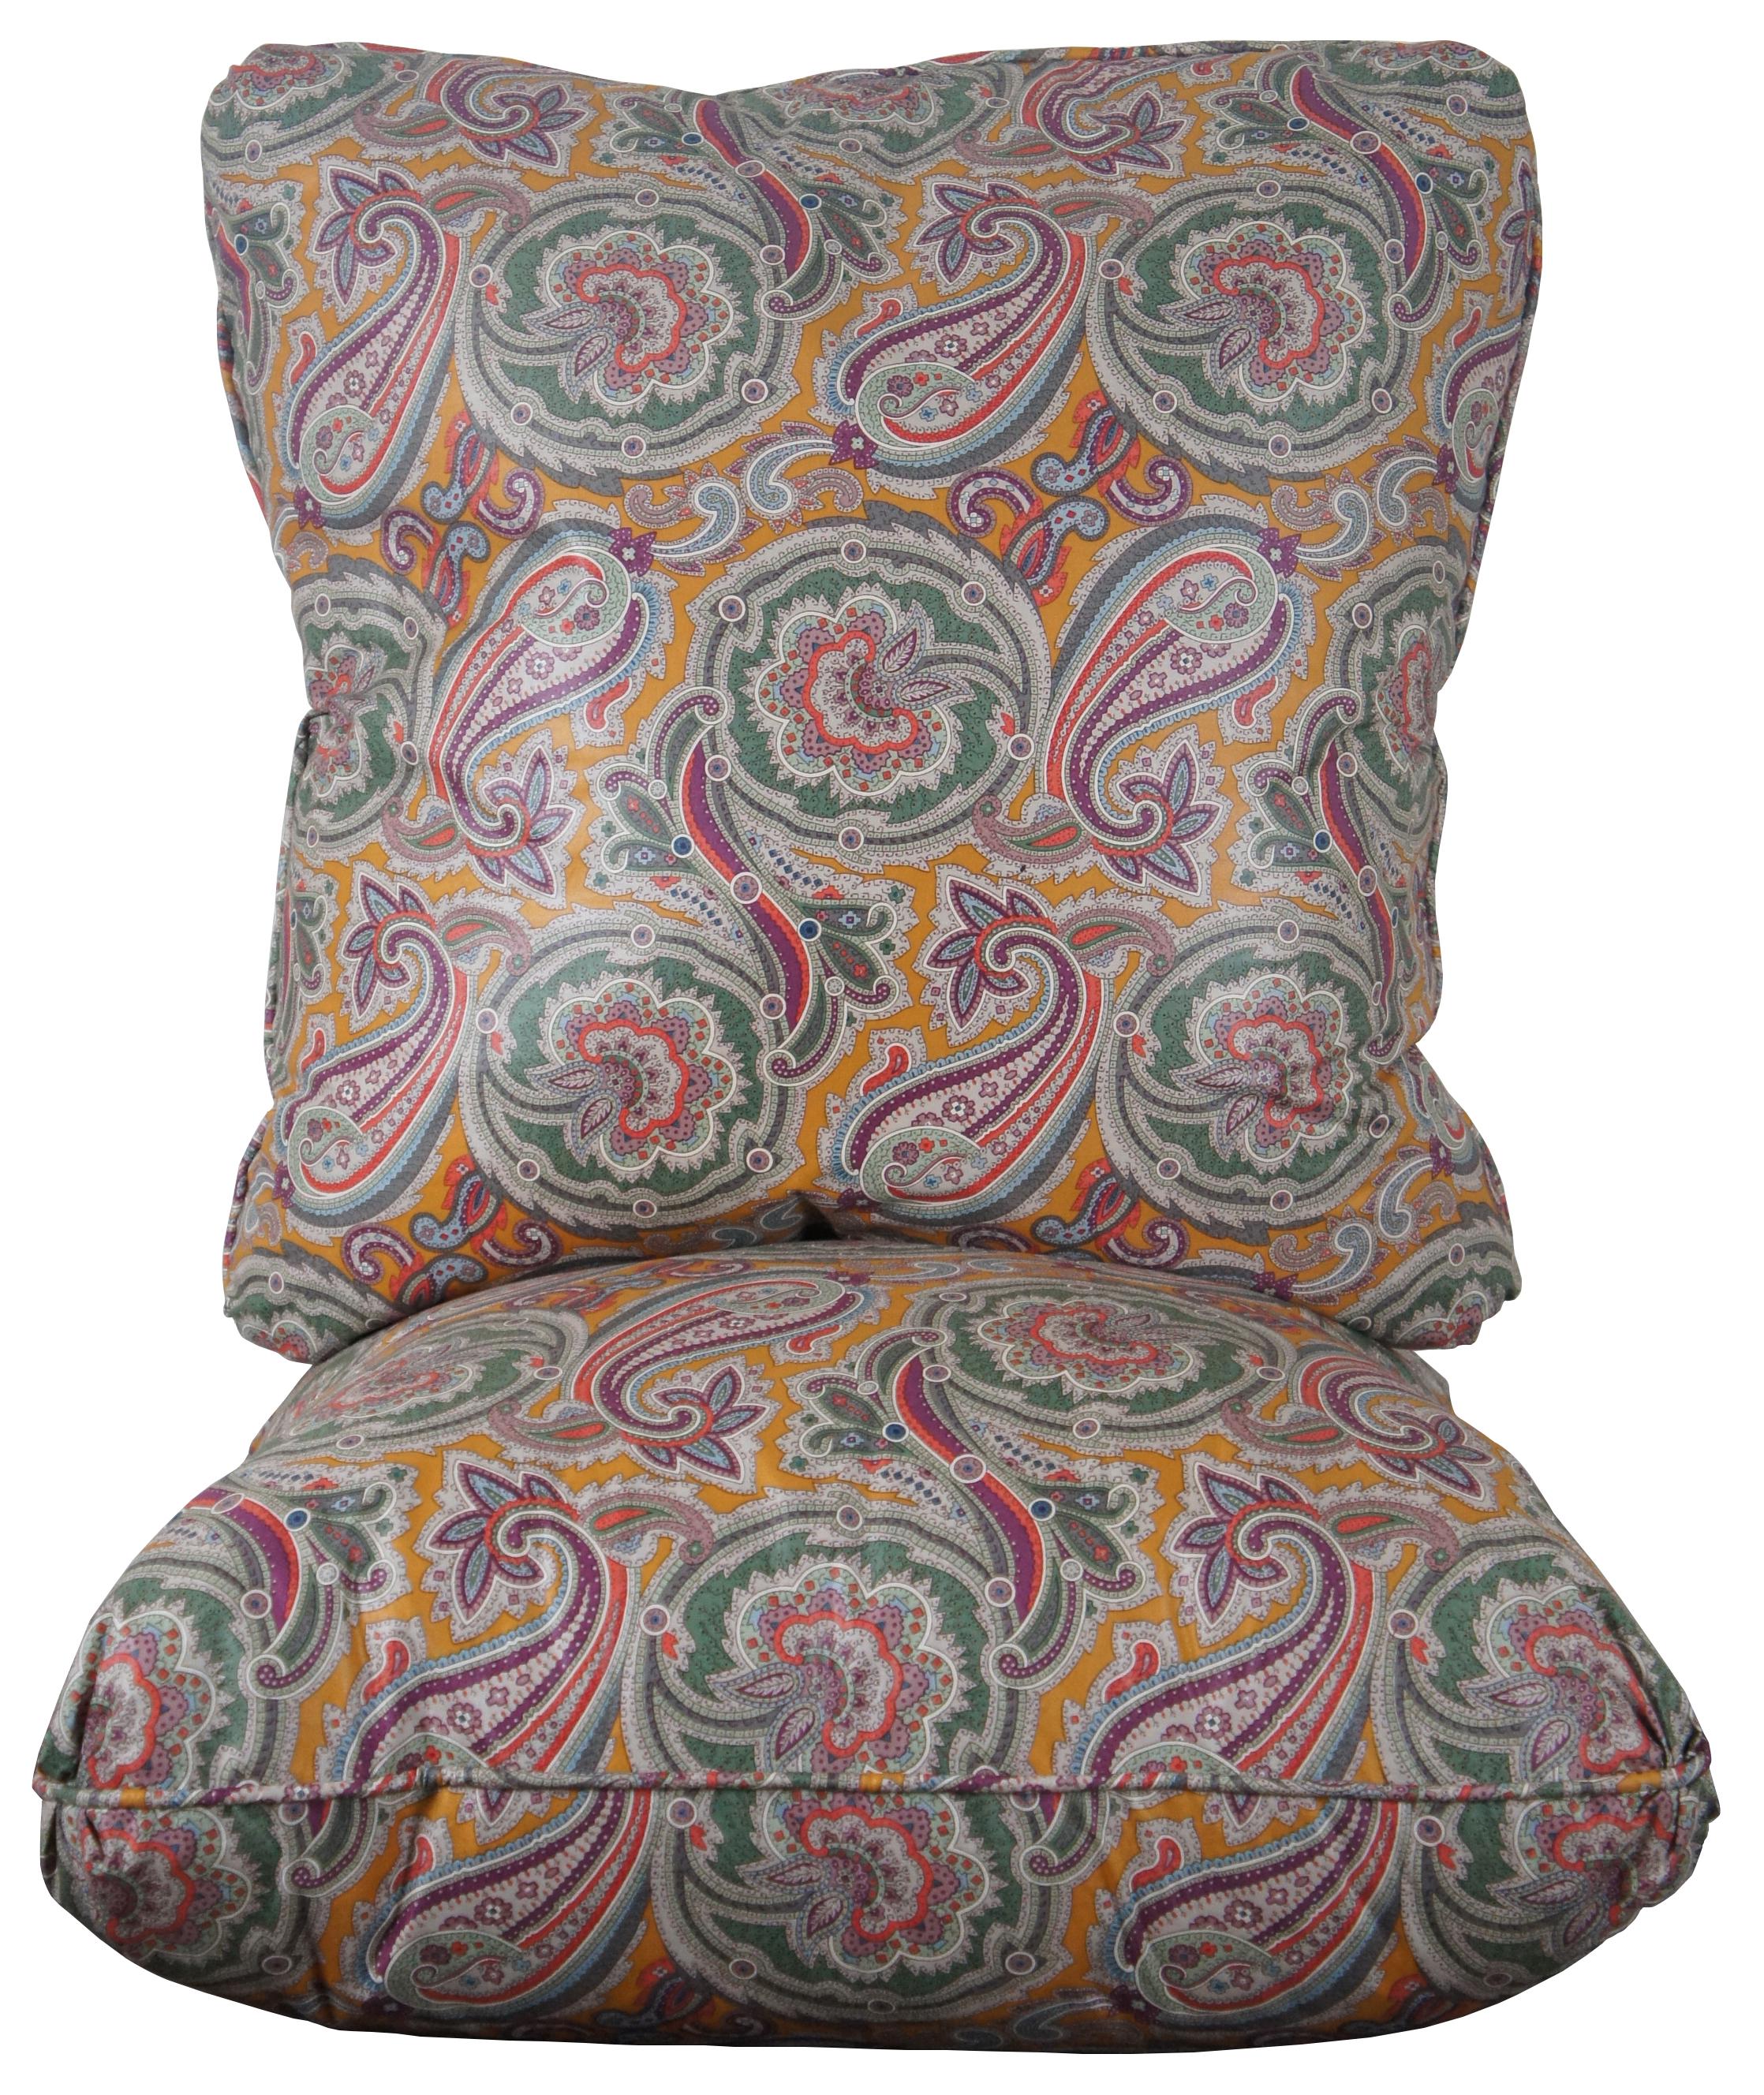 Pair of large down filled throw pillows covered in green, yellow, purple and pink floral paisley fabric. Measure: 20